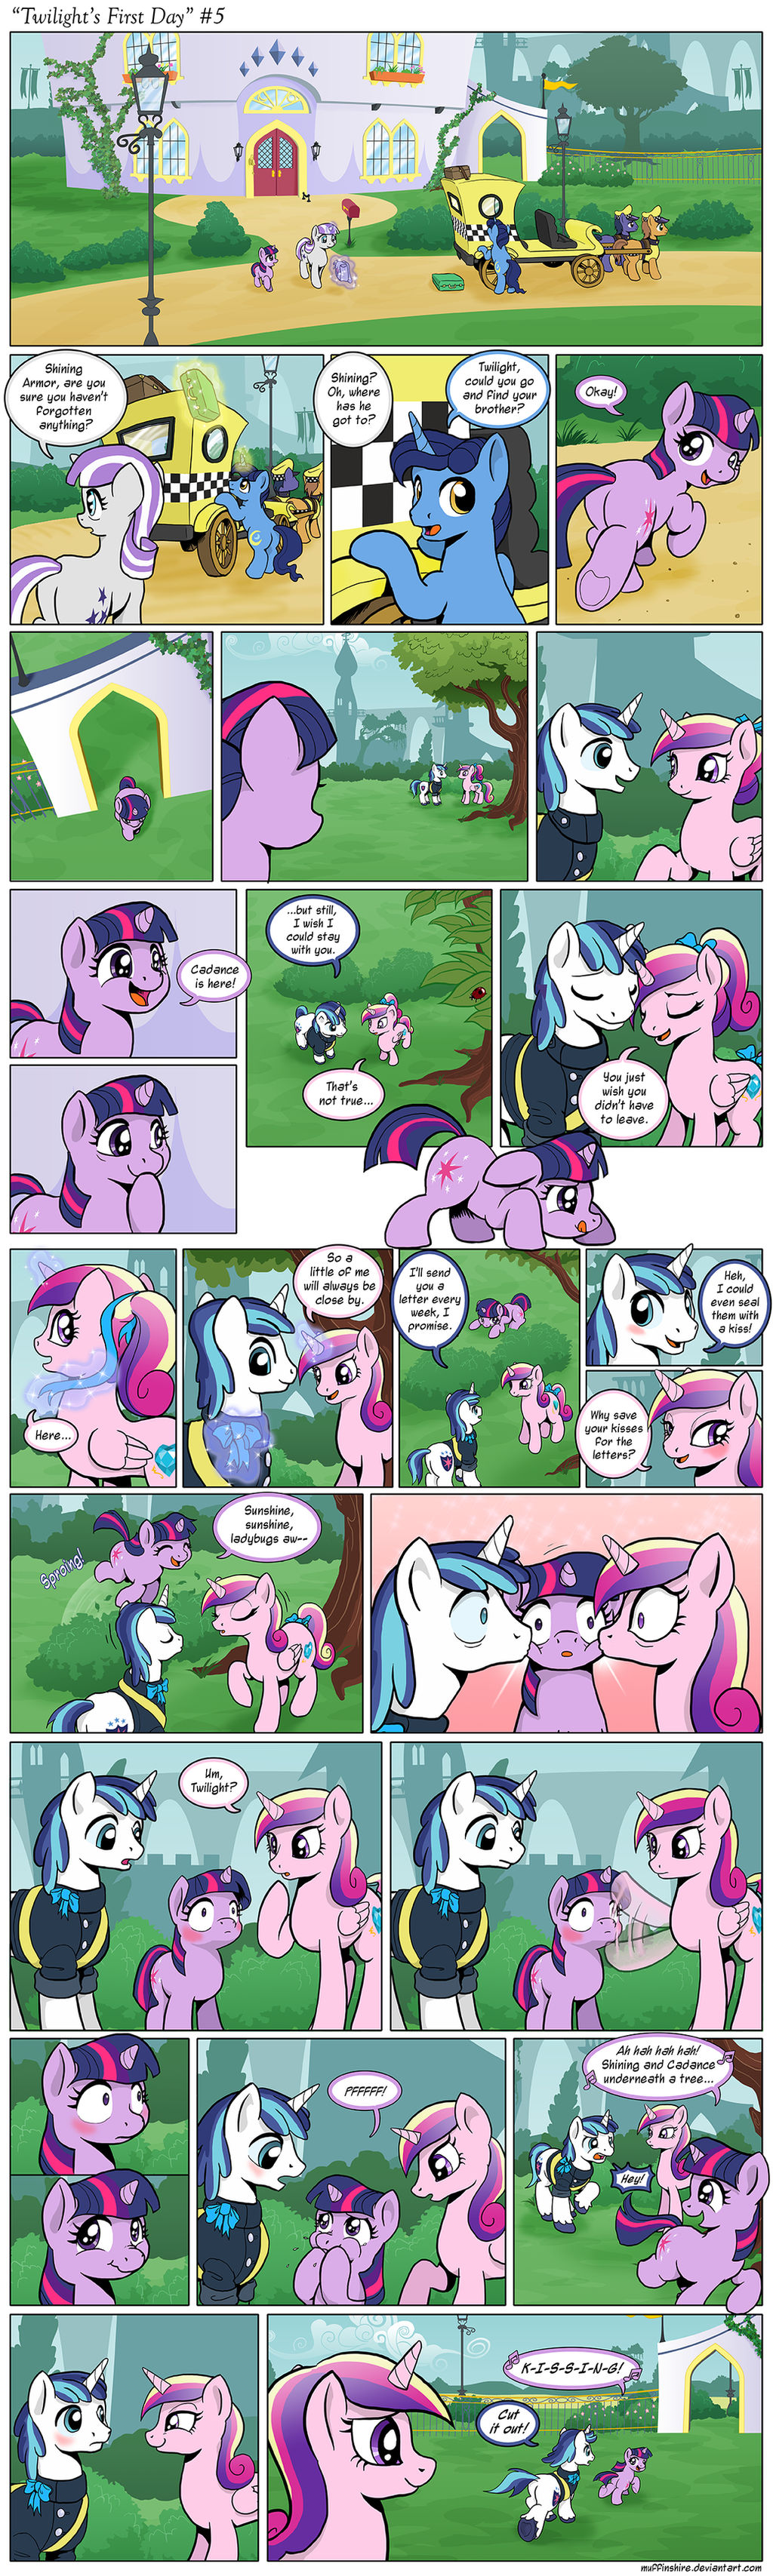 Comic - Twilight's First Day #5